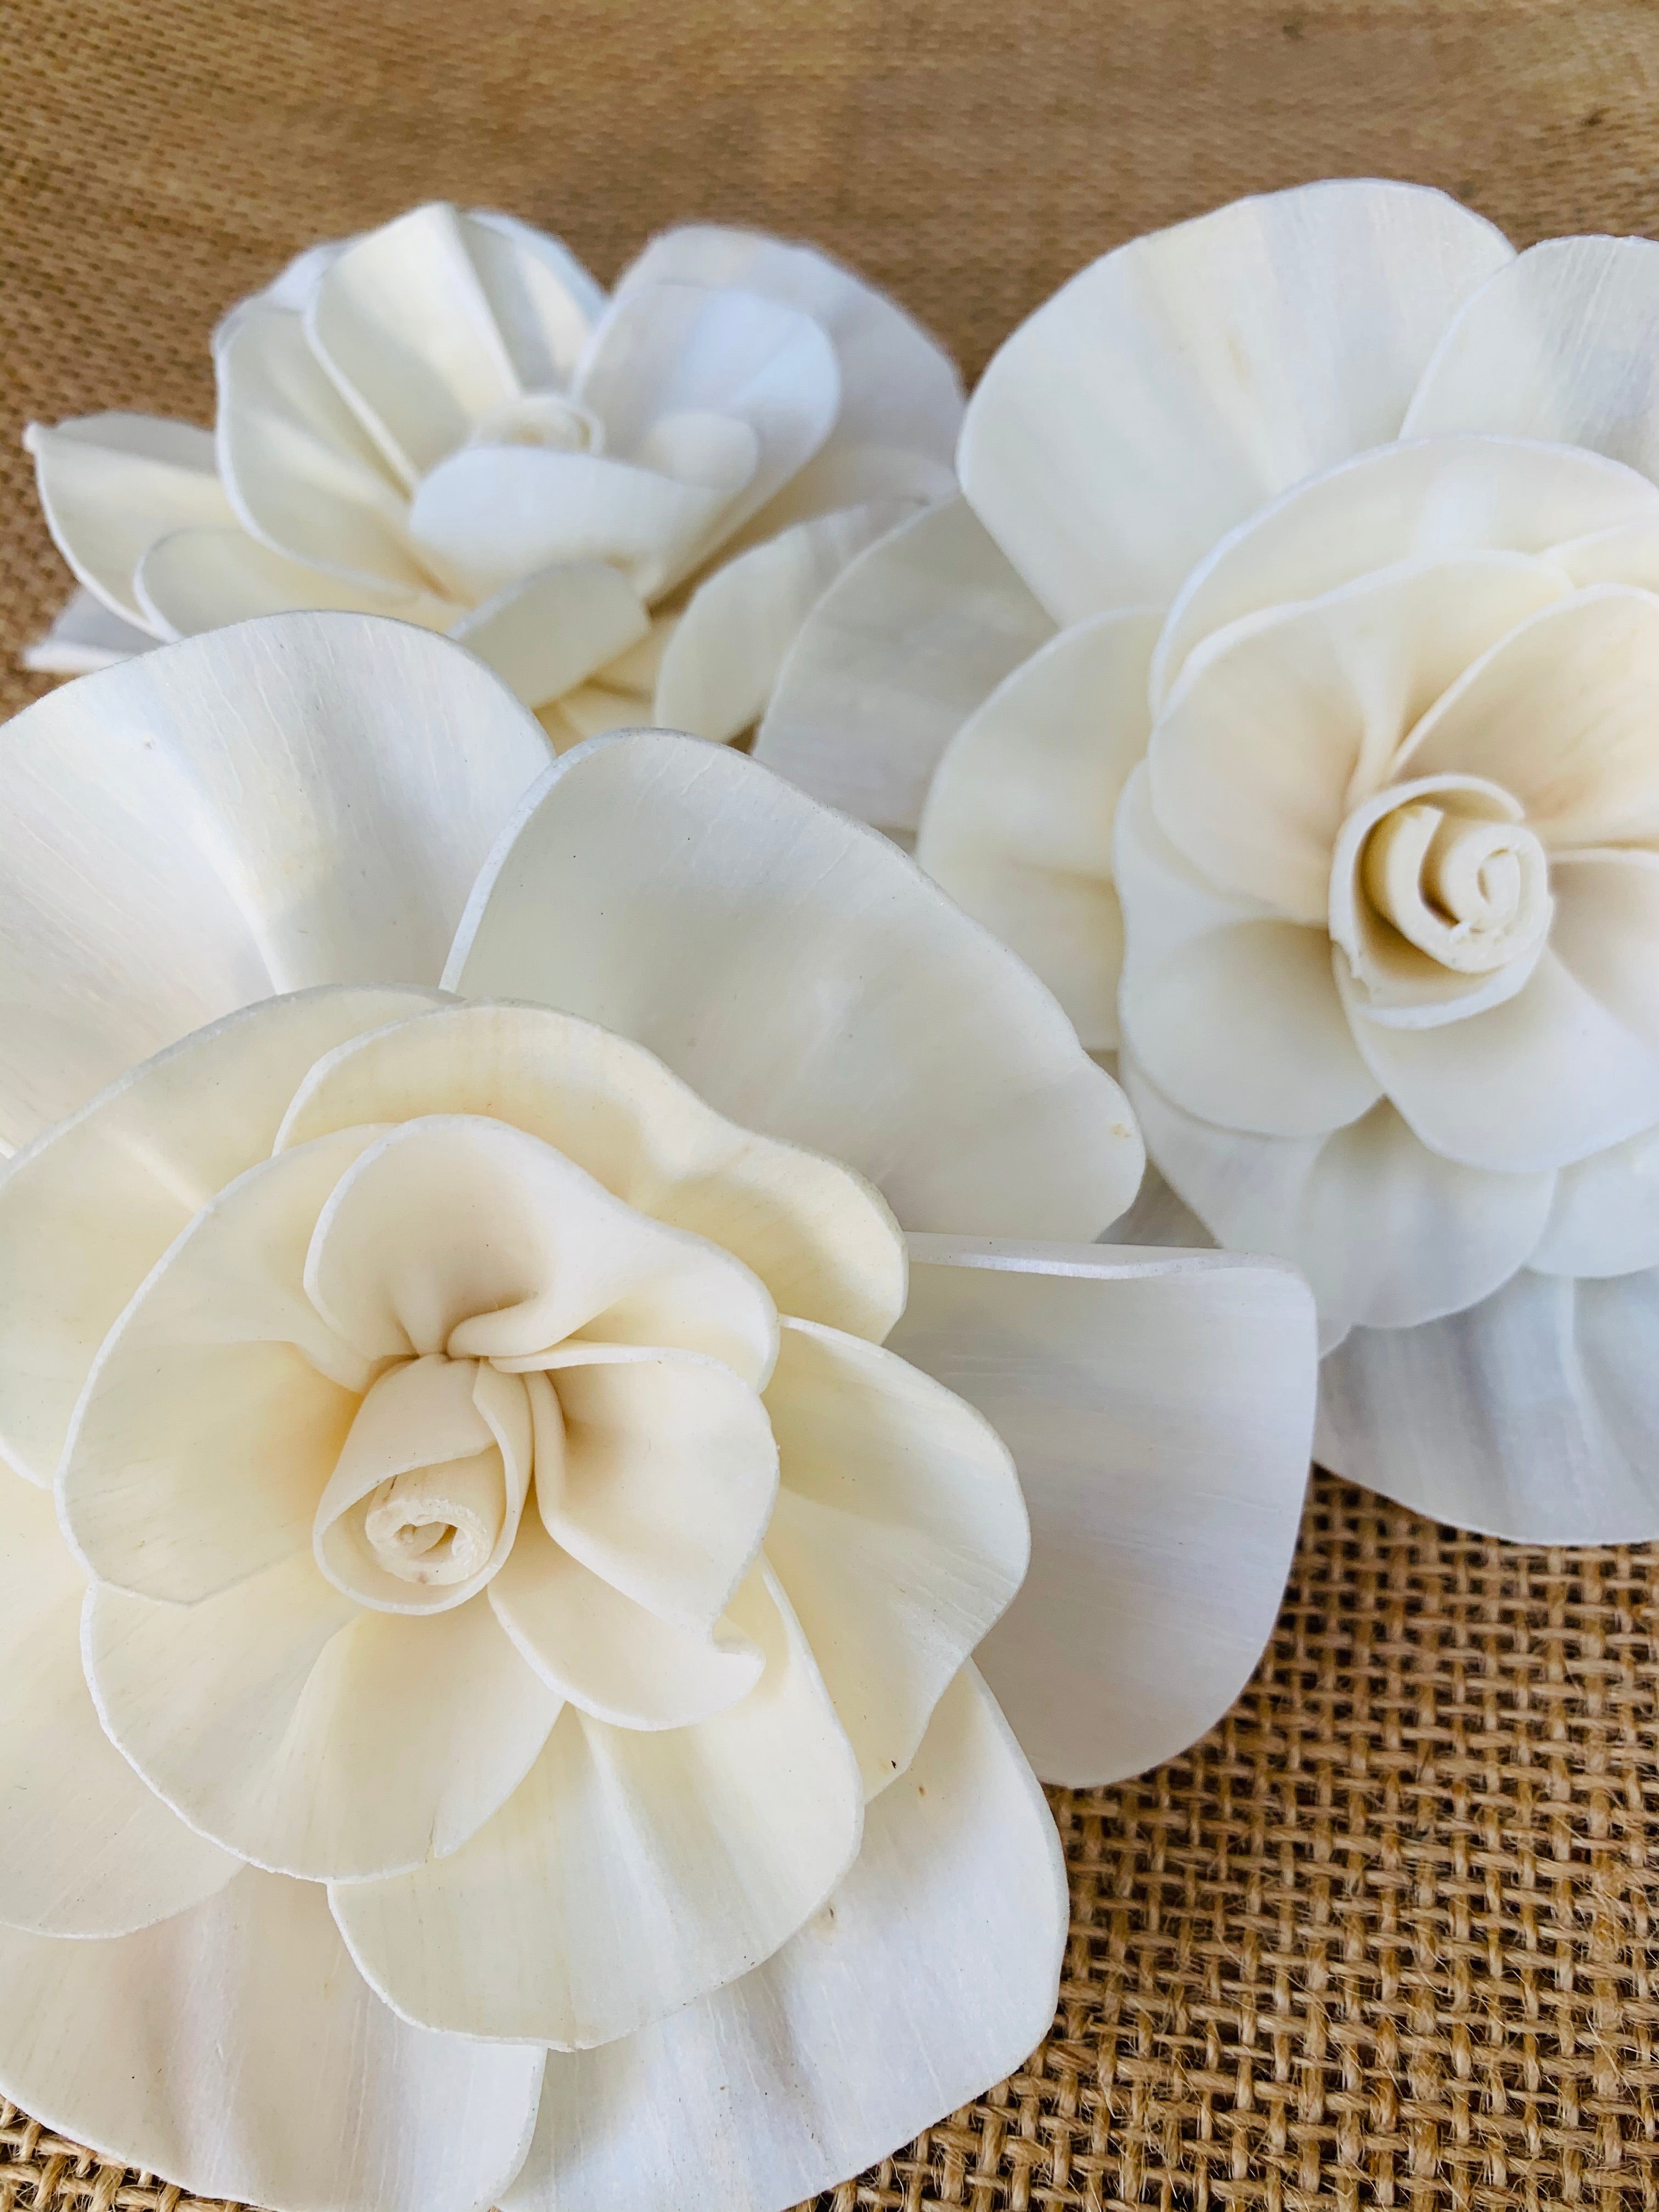 Beautiful Paper Roses tutorial for Valentine's Day, wedding